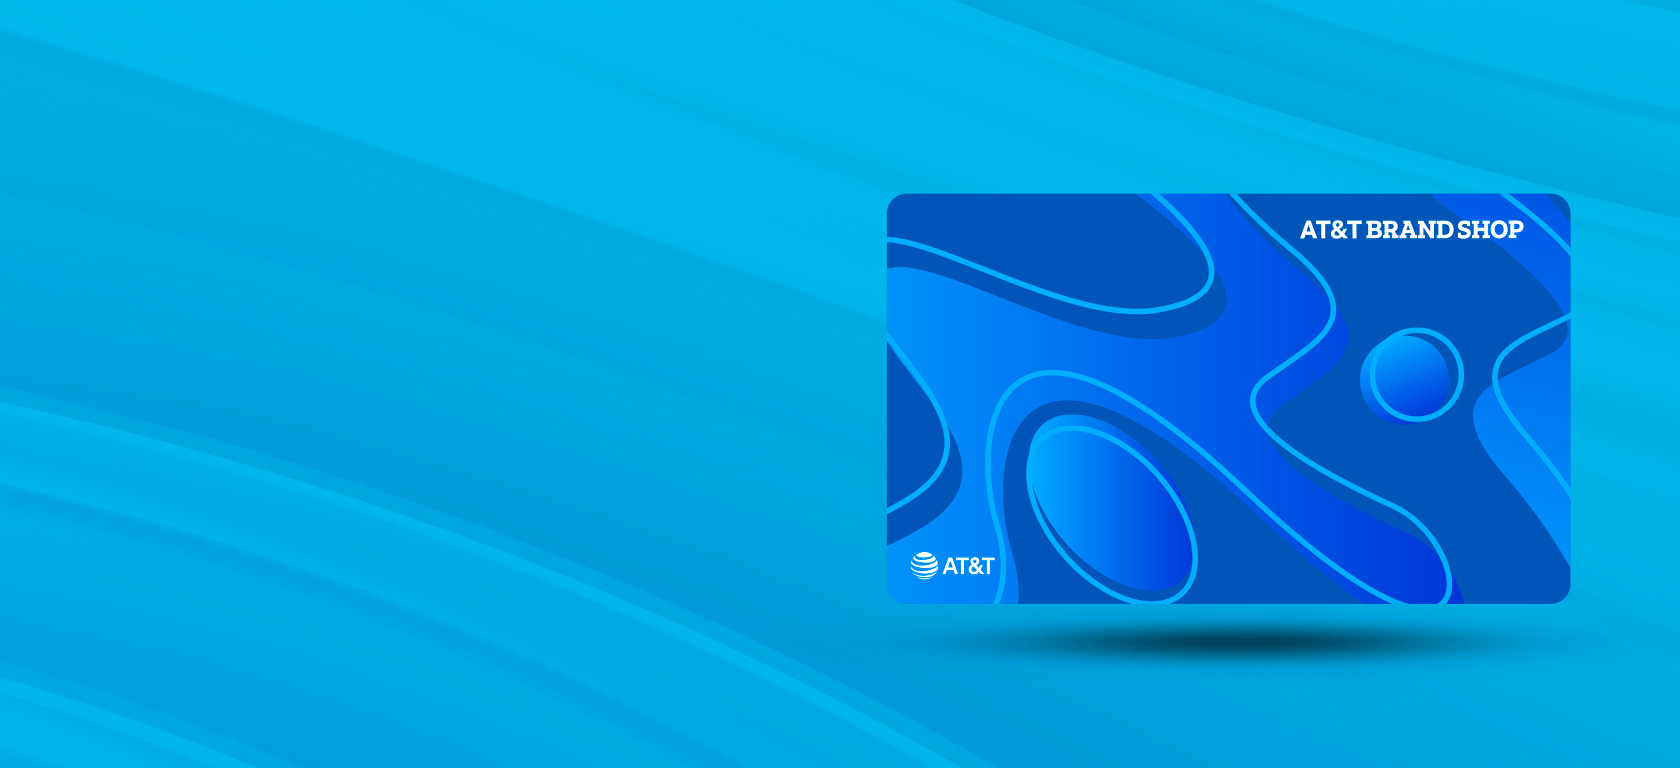 AT&T Brand Shop - E-Gift Card